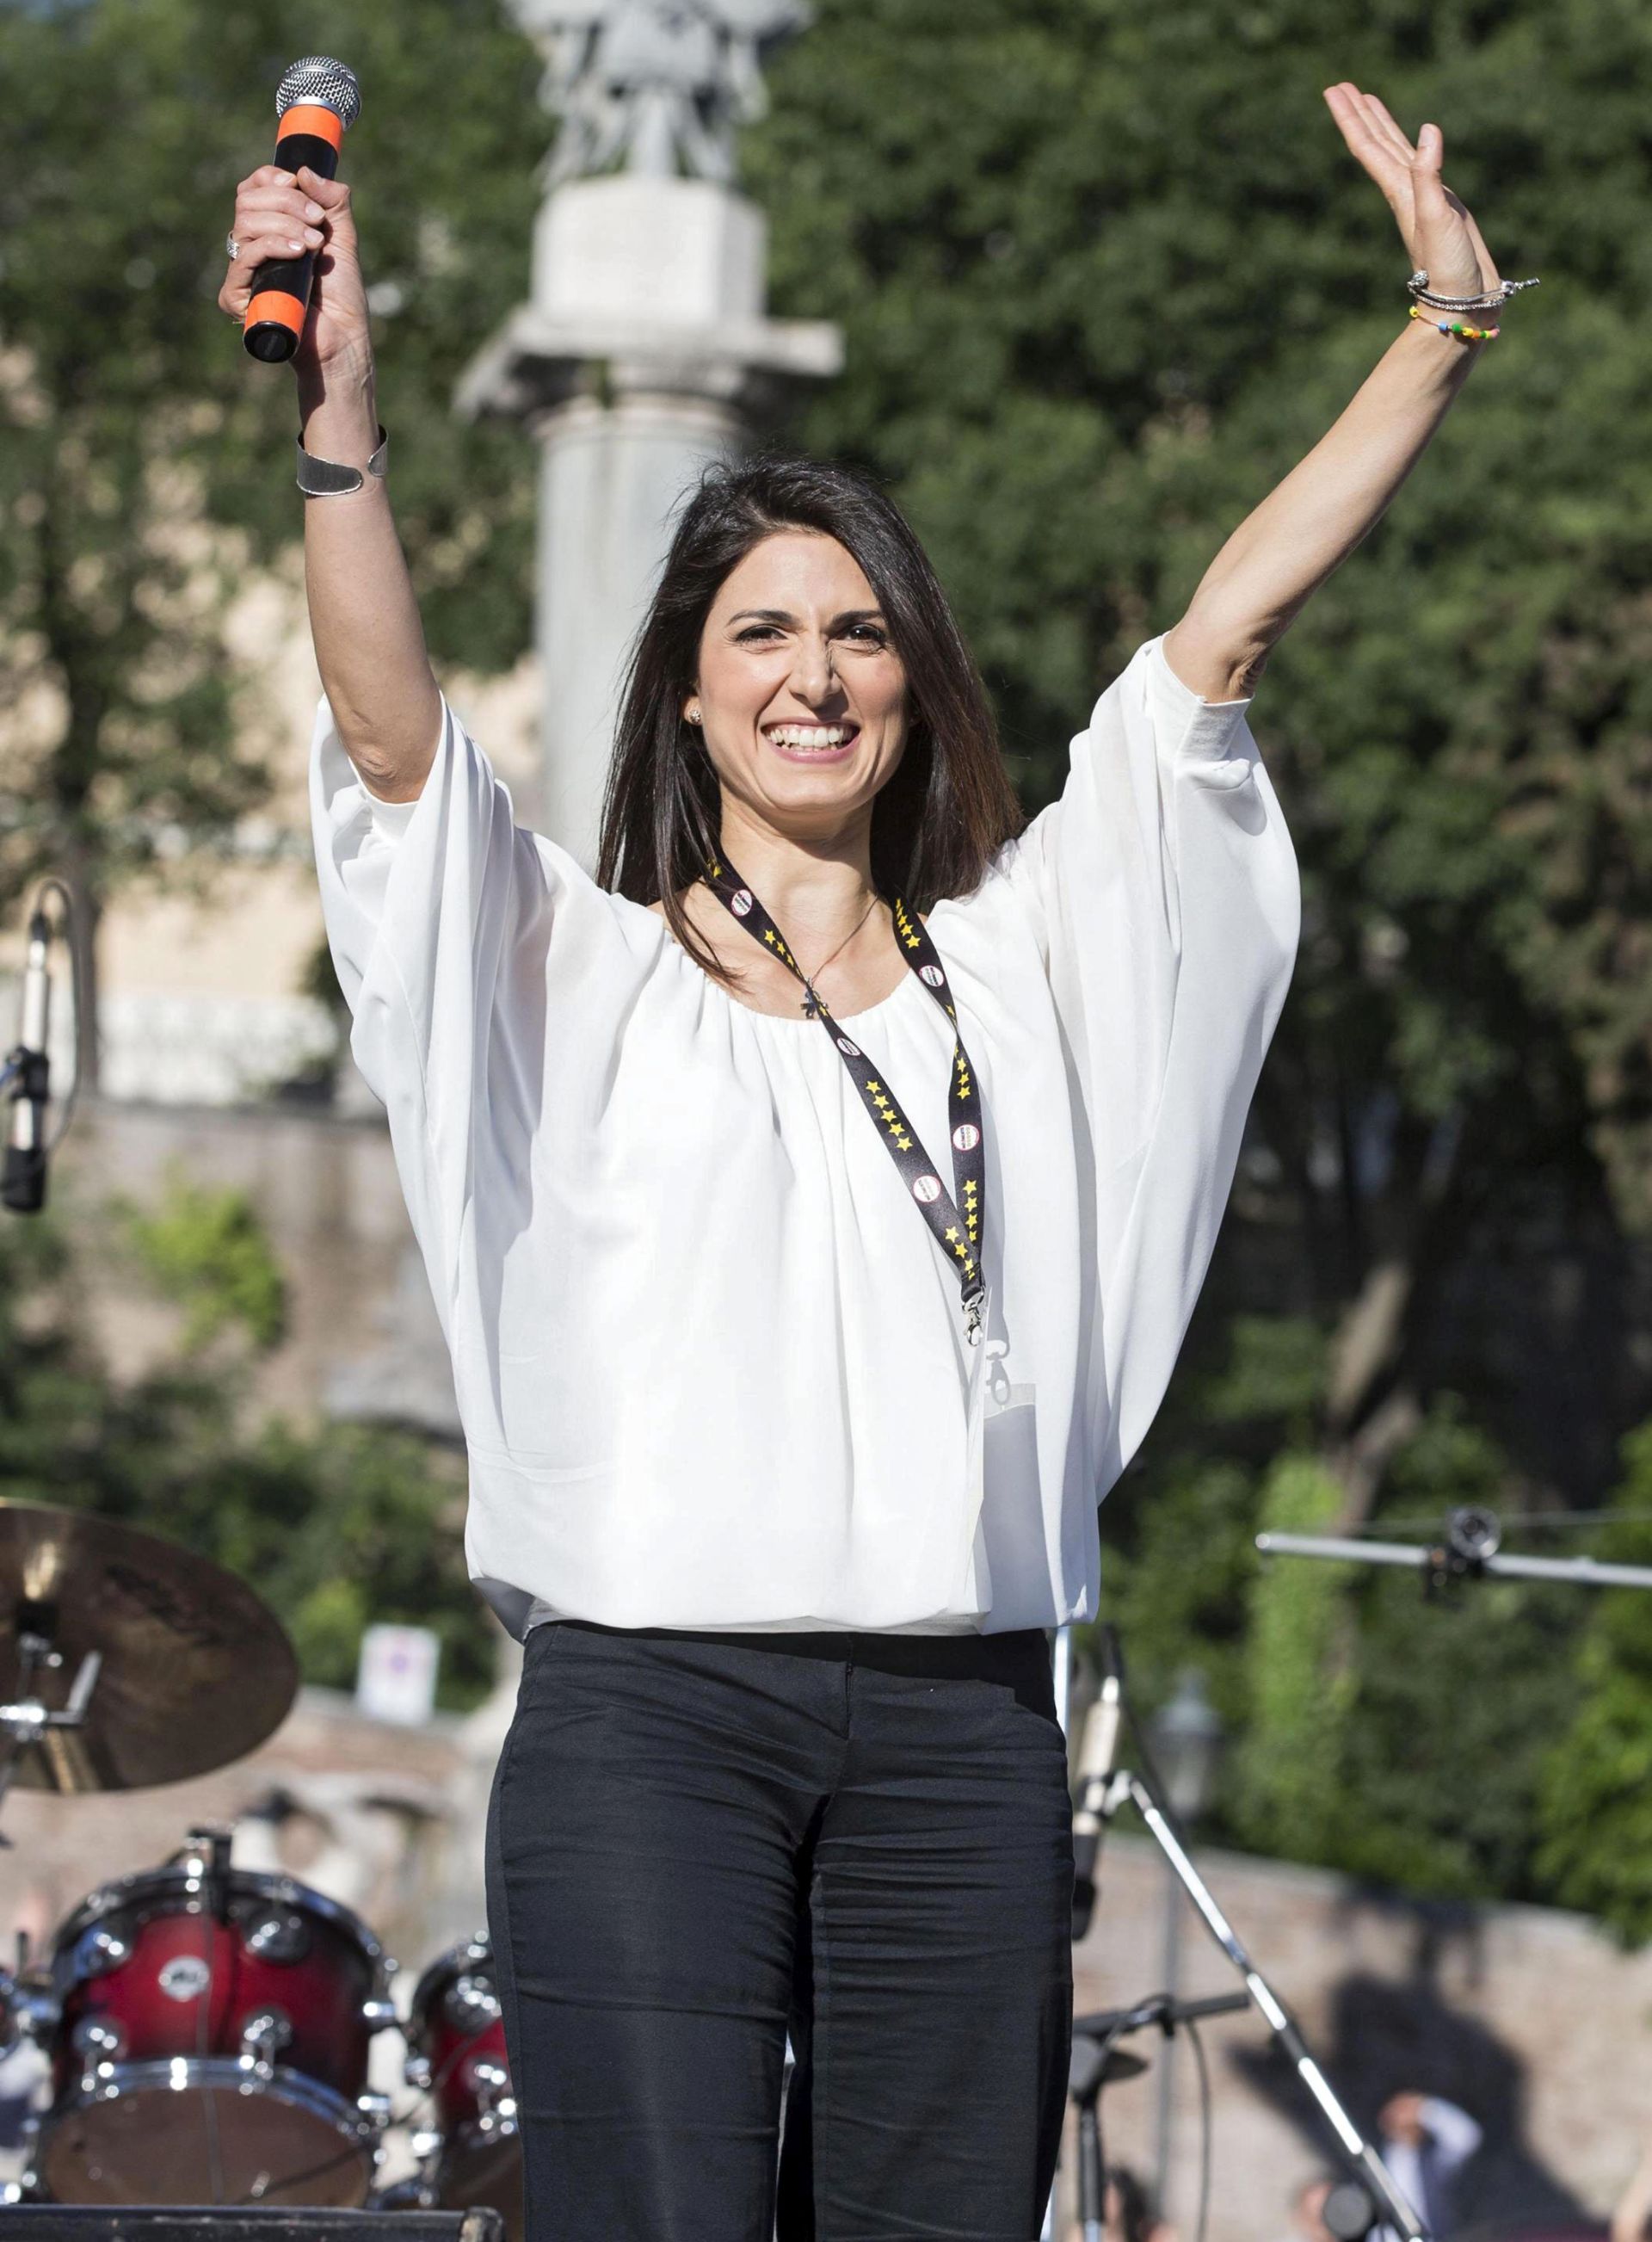 epa05344641 Virginia Raggi, Rome mayoral candidate of anti-establishment 5-Star Movement (M5S), waves during a election campain rally in Rome, Italy, 03 June 2016. Municipal elections will be held in Milan, Rome and other Italian major cities on 05 June.  EPA/MASSIMO PERCOSSI